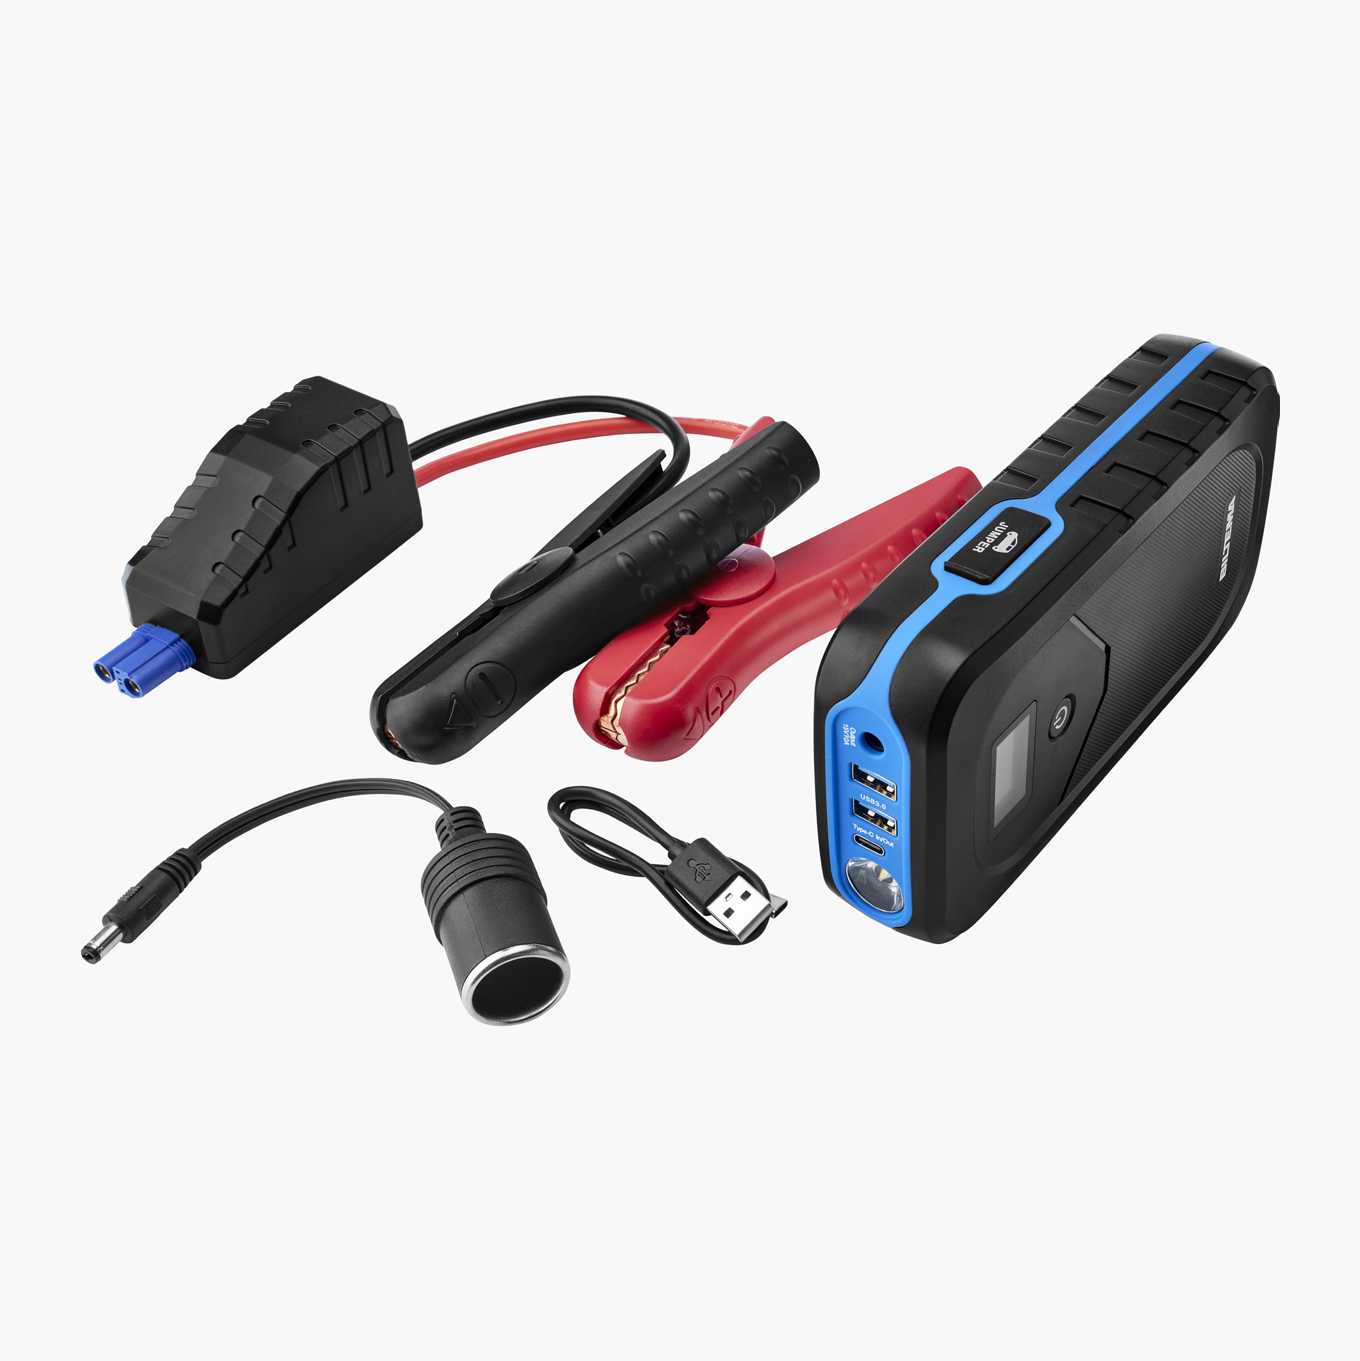 Jump starter 12 V with power bank, 1200 A 